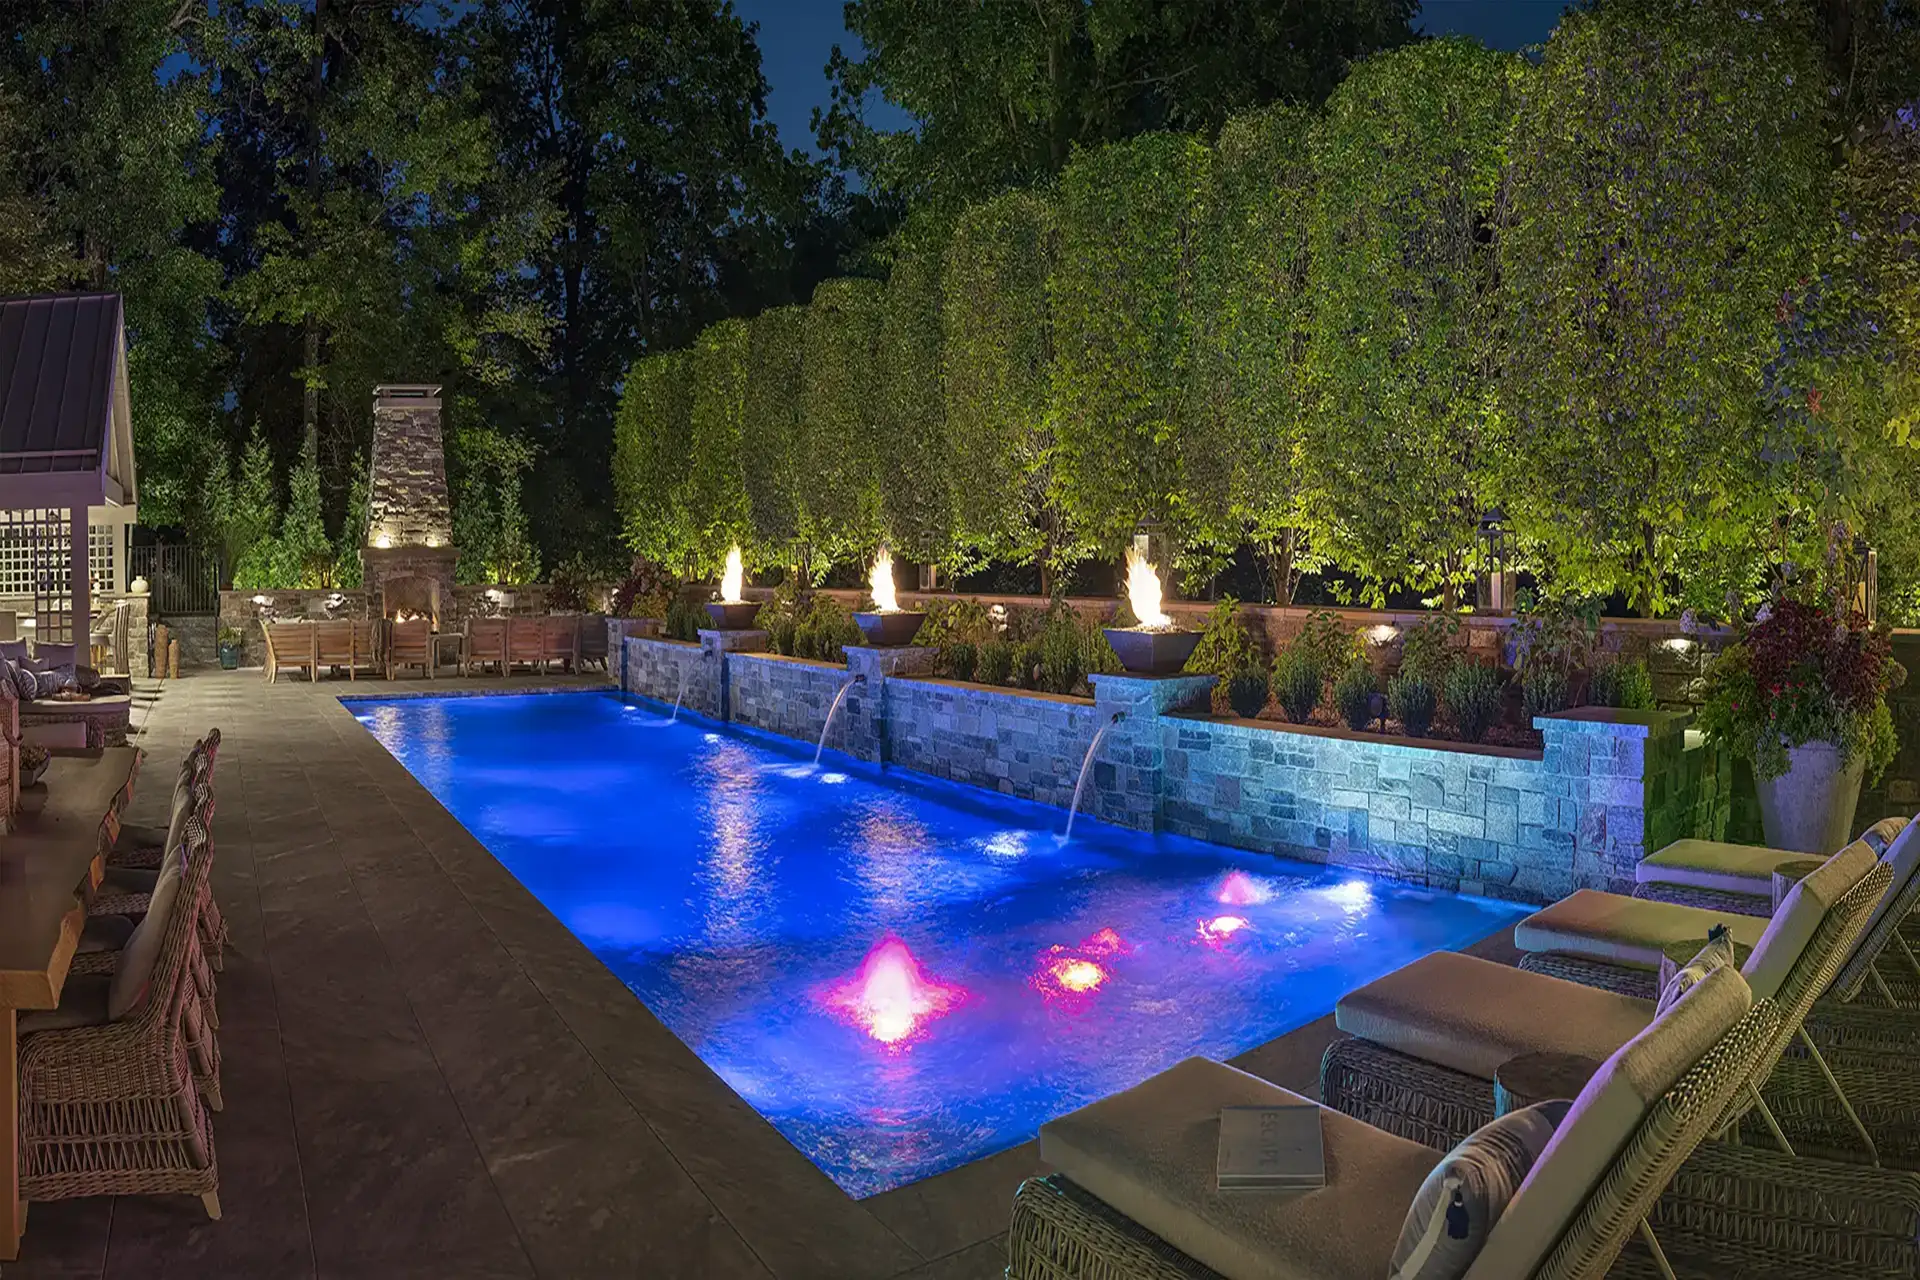 Spaas residence image 2 pool seating area Lighthouse Outdoor Lighting and Audio Northern New Jersey